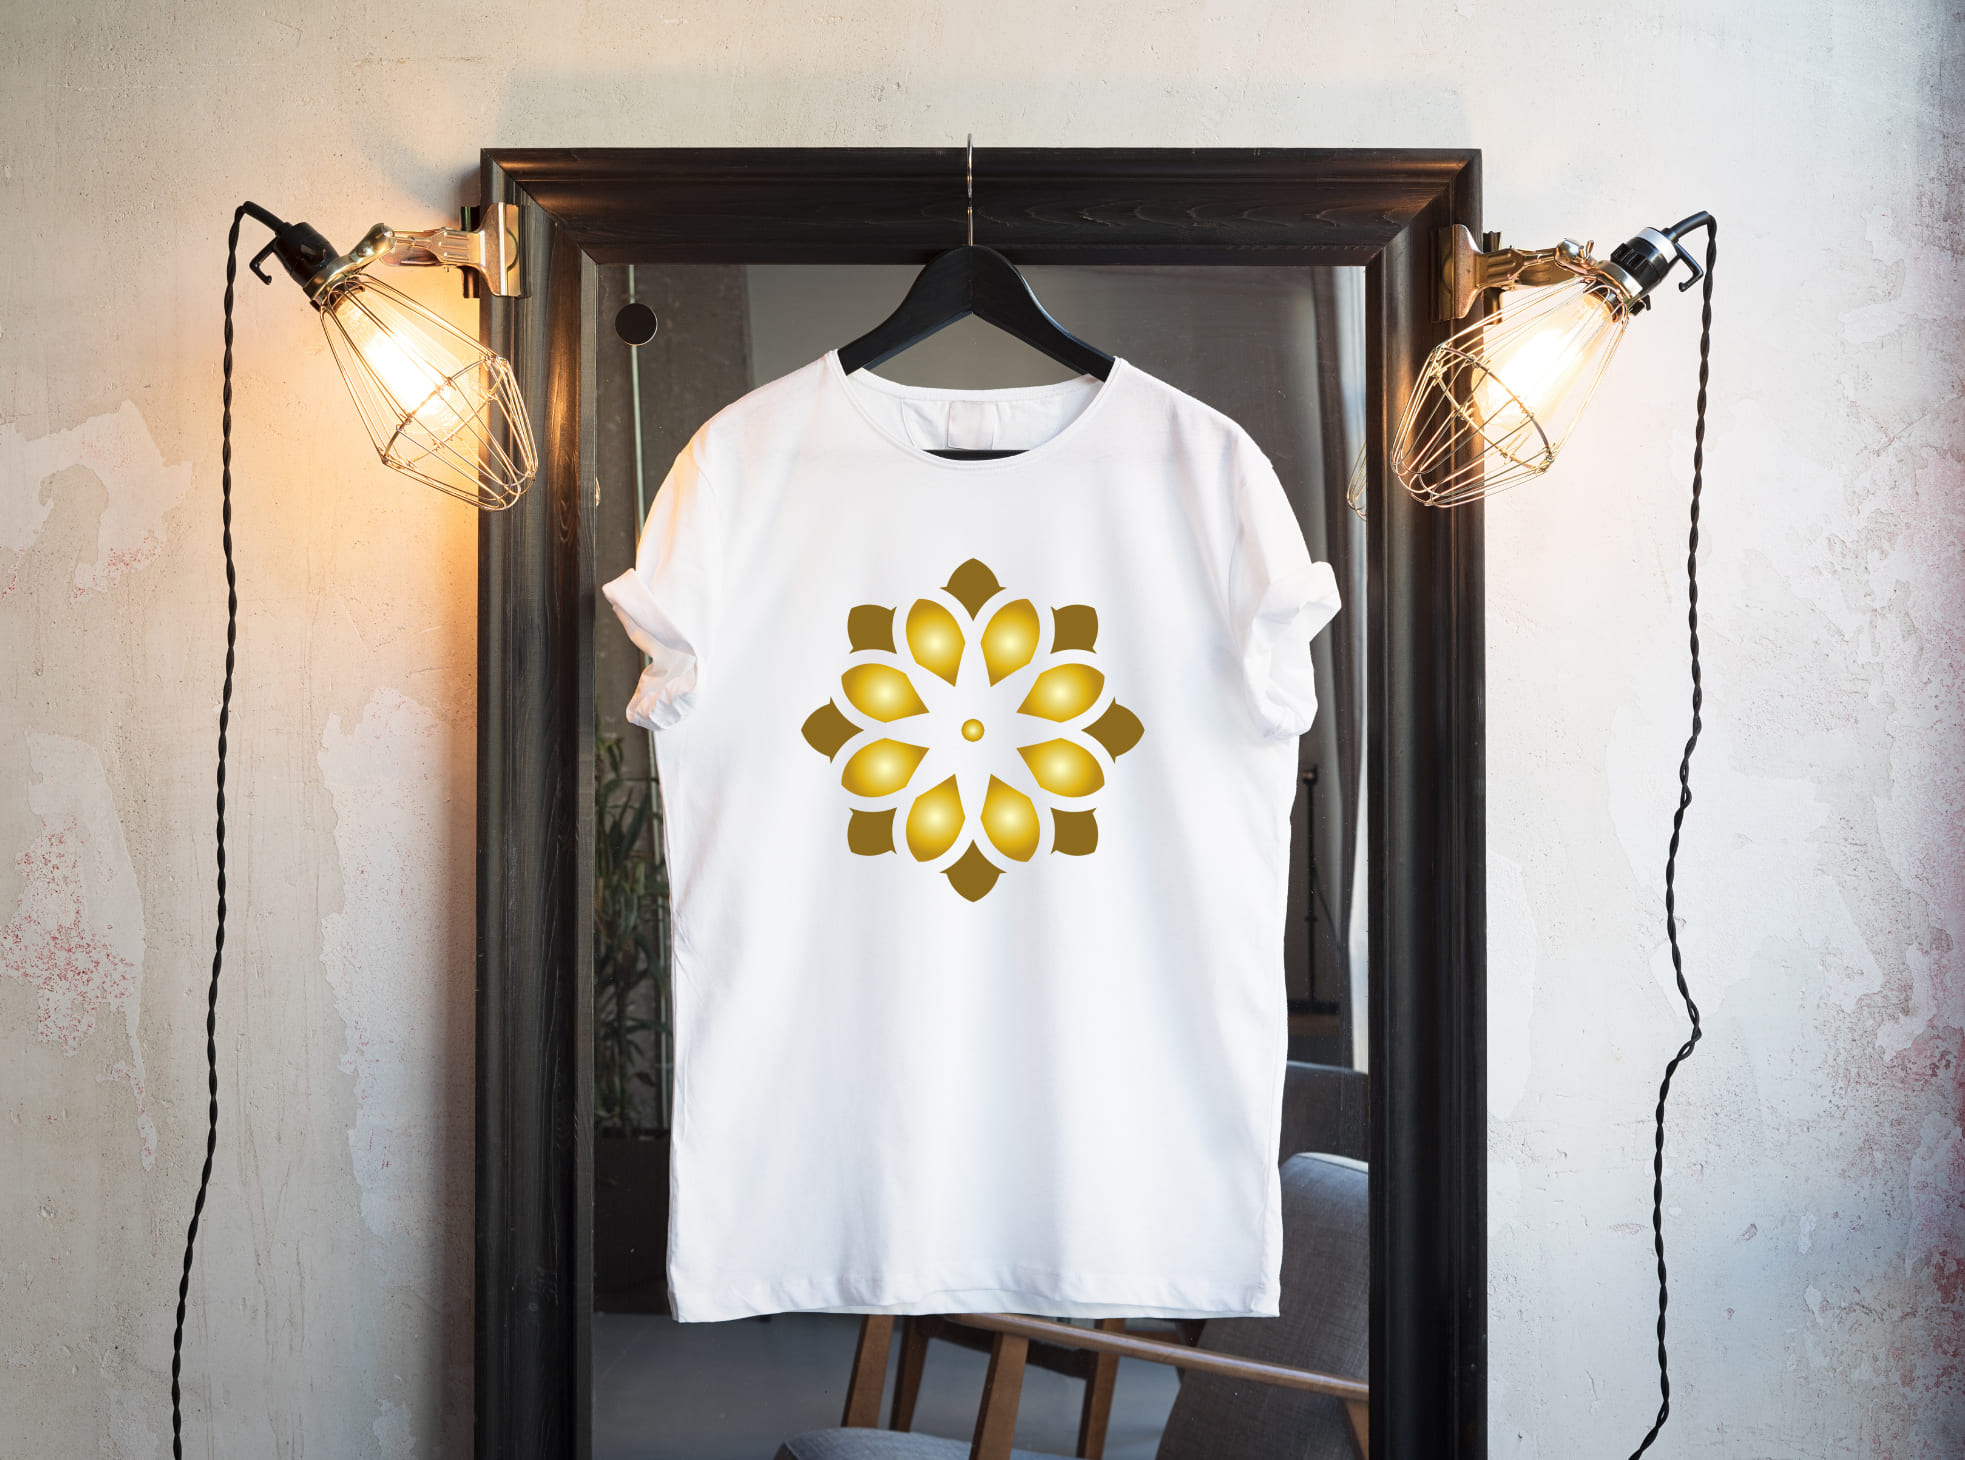 Creative yellow lotus with the rounds on the white t-shirt.